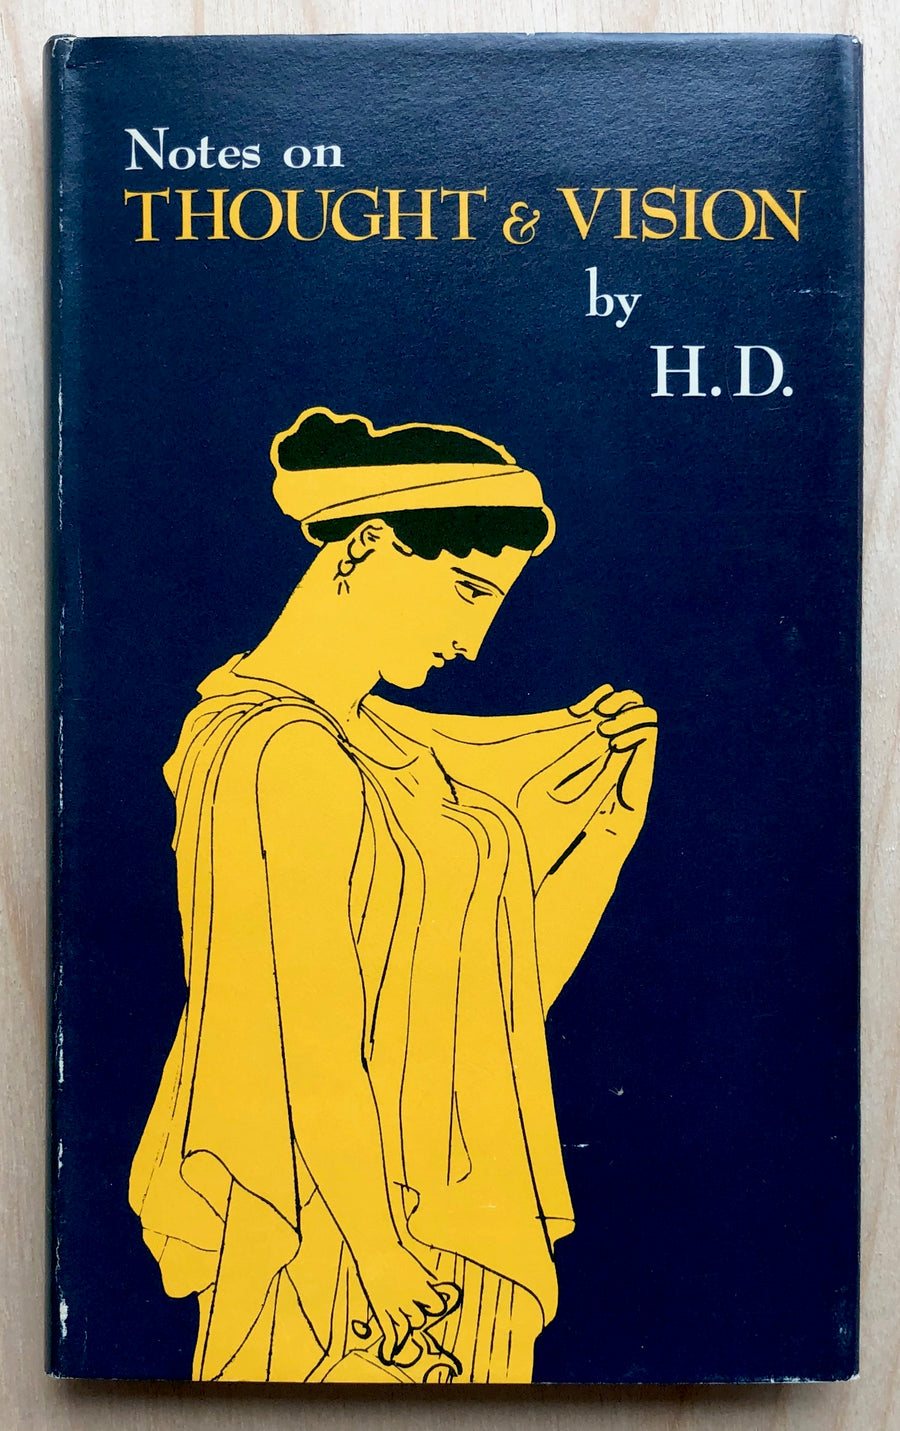 NOTES ON THOUGHT & VISION by H.D. (Hilda Doolittle)